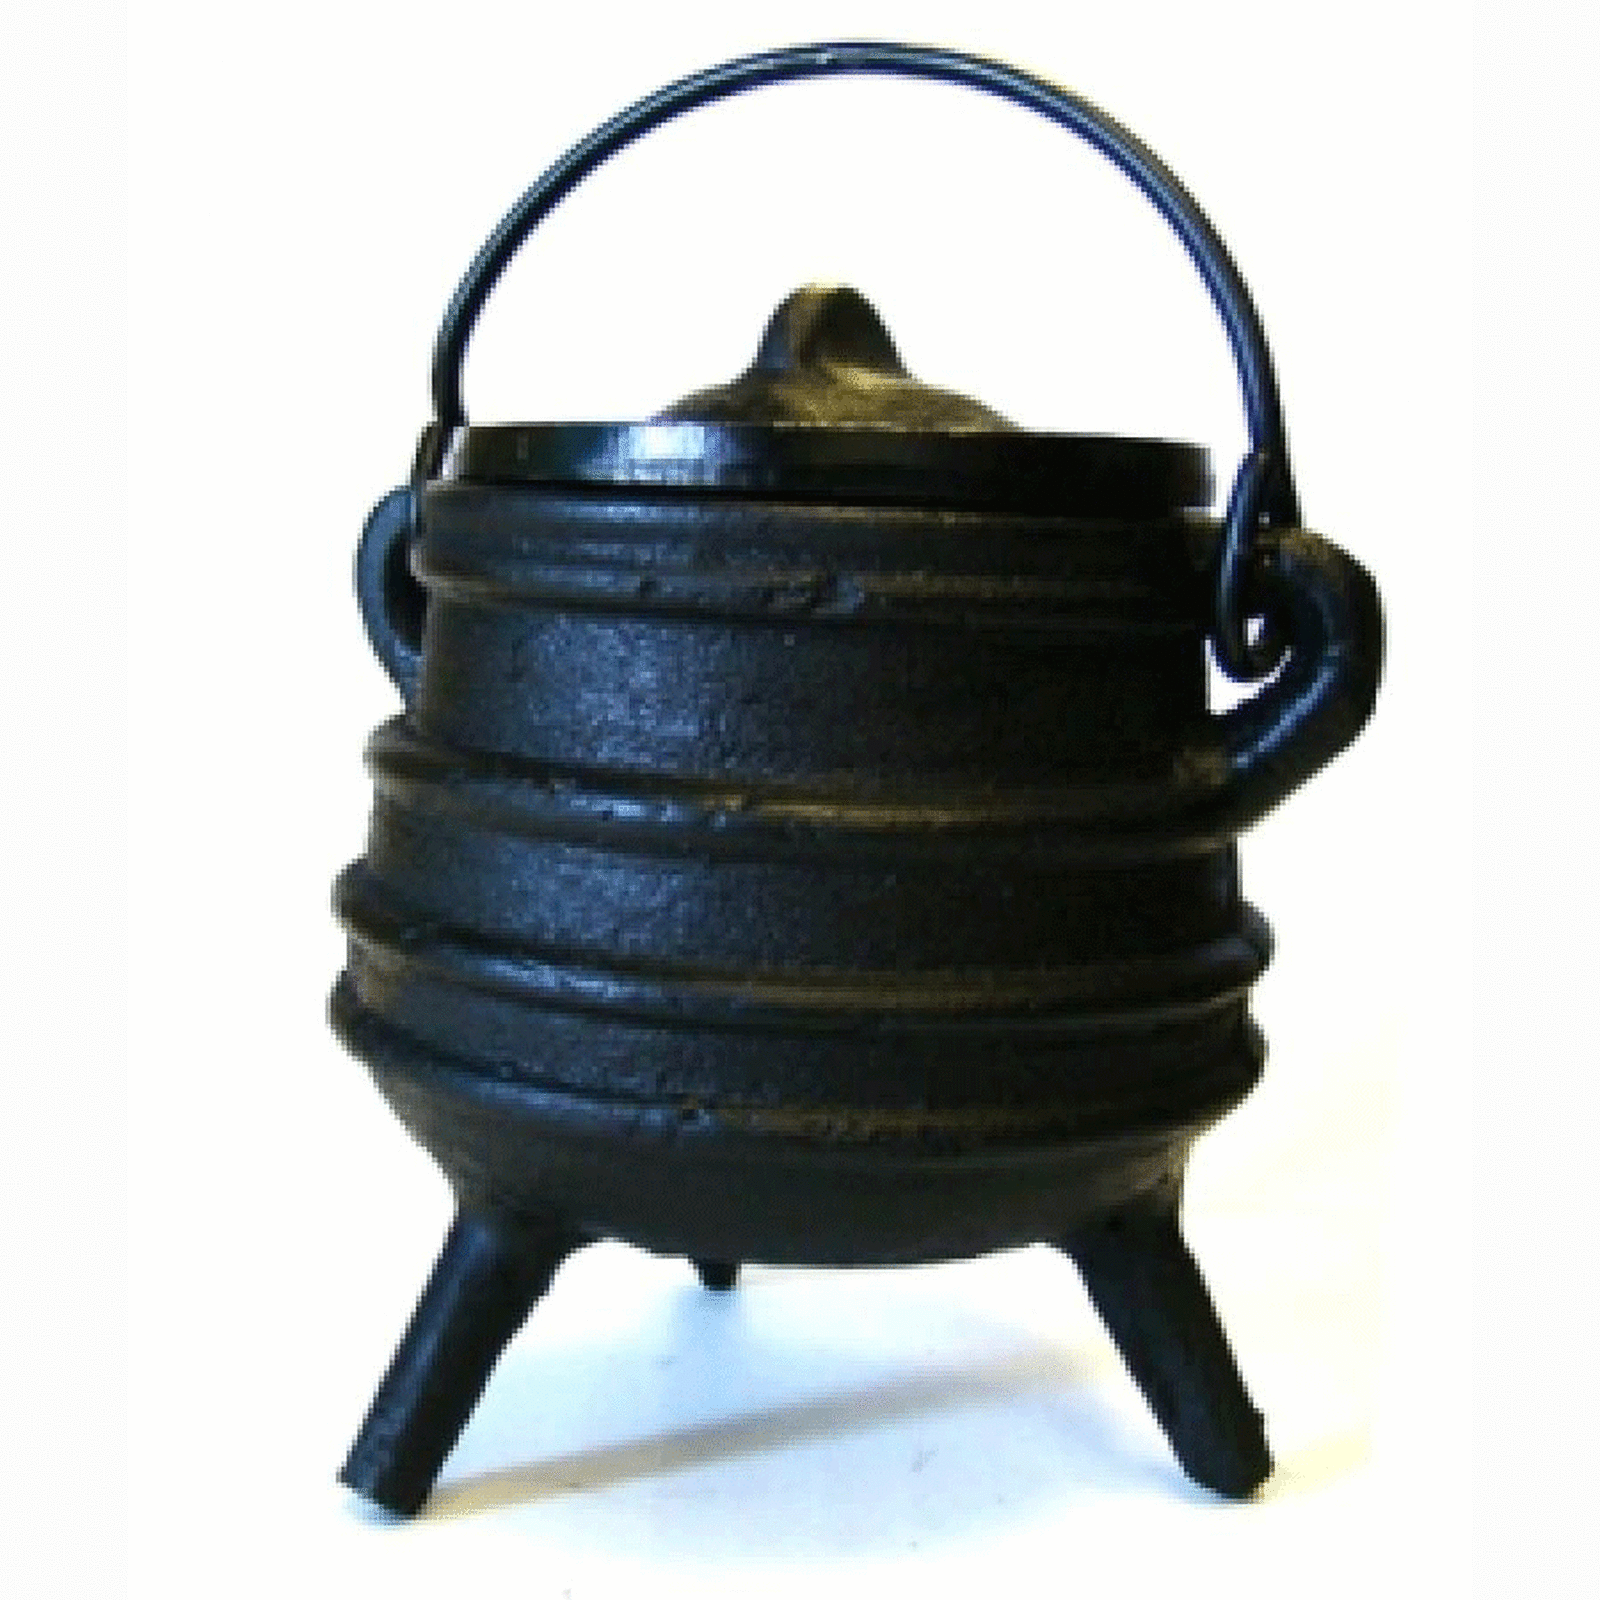 3" Cast Iron Pot with Lid